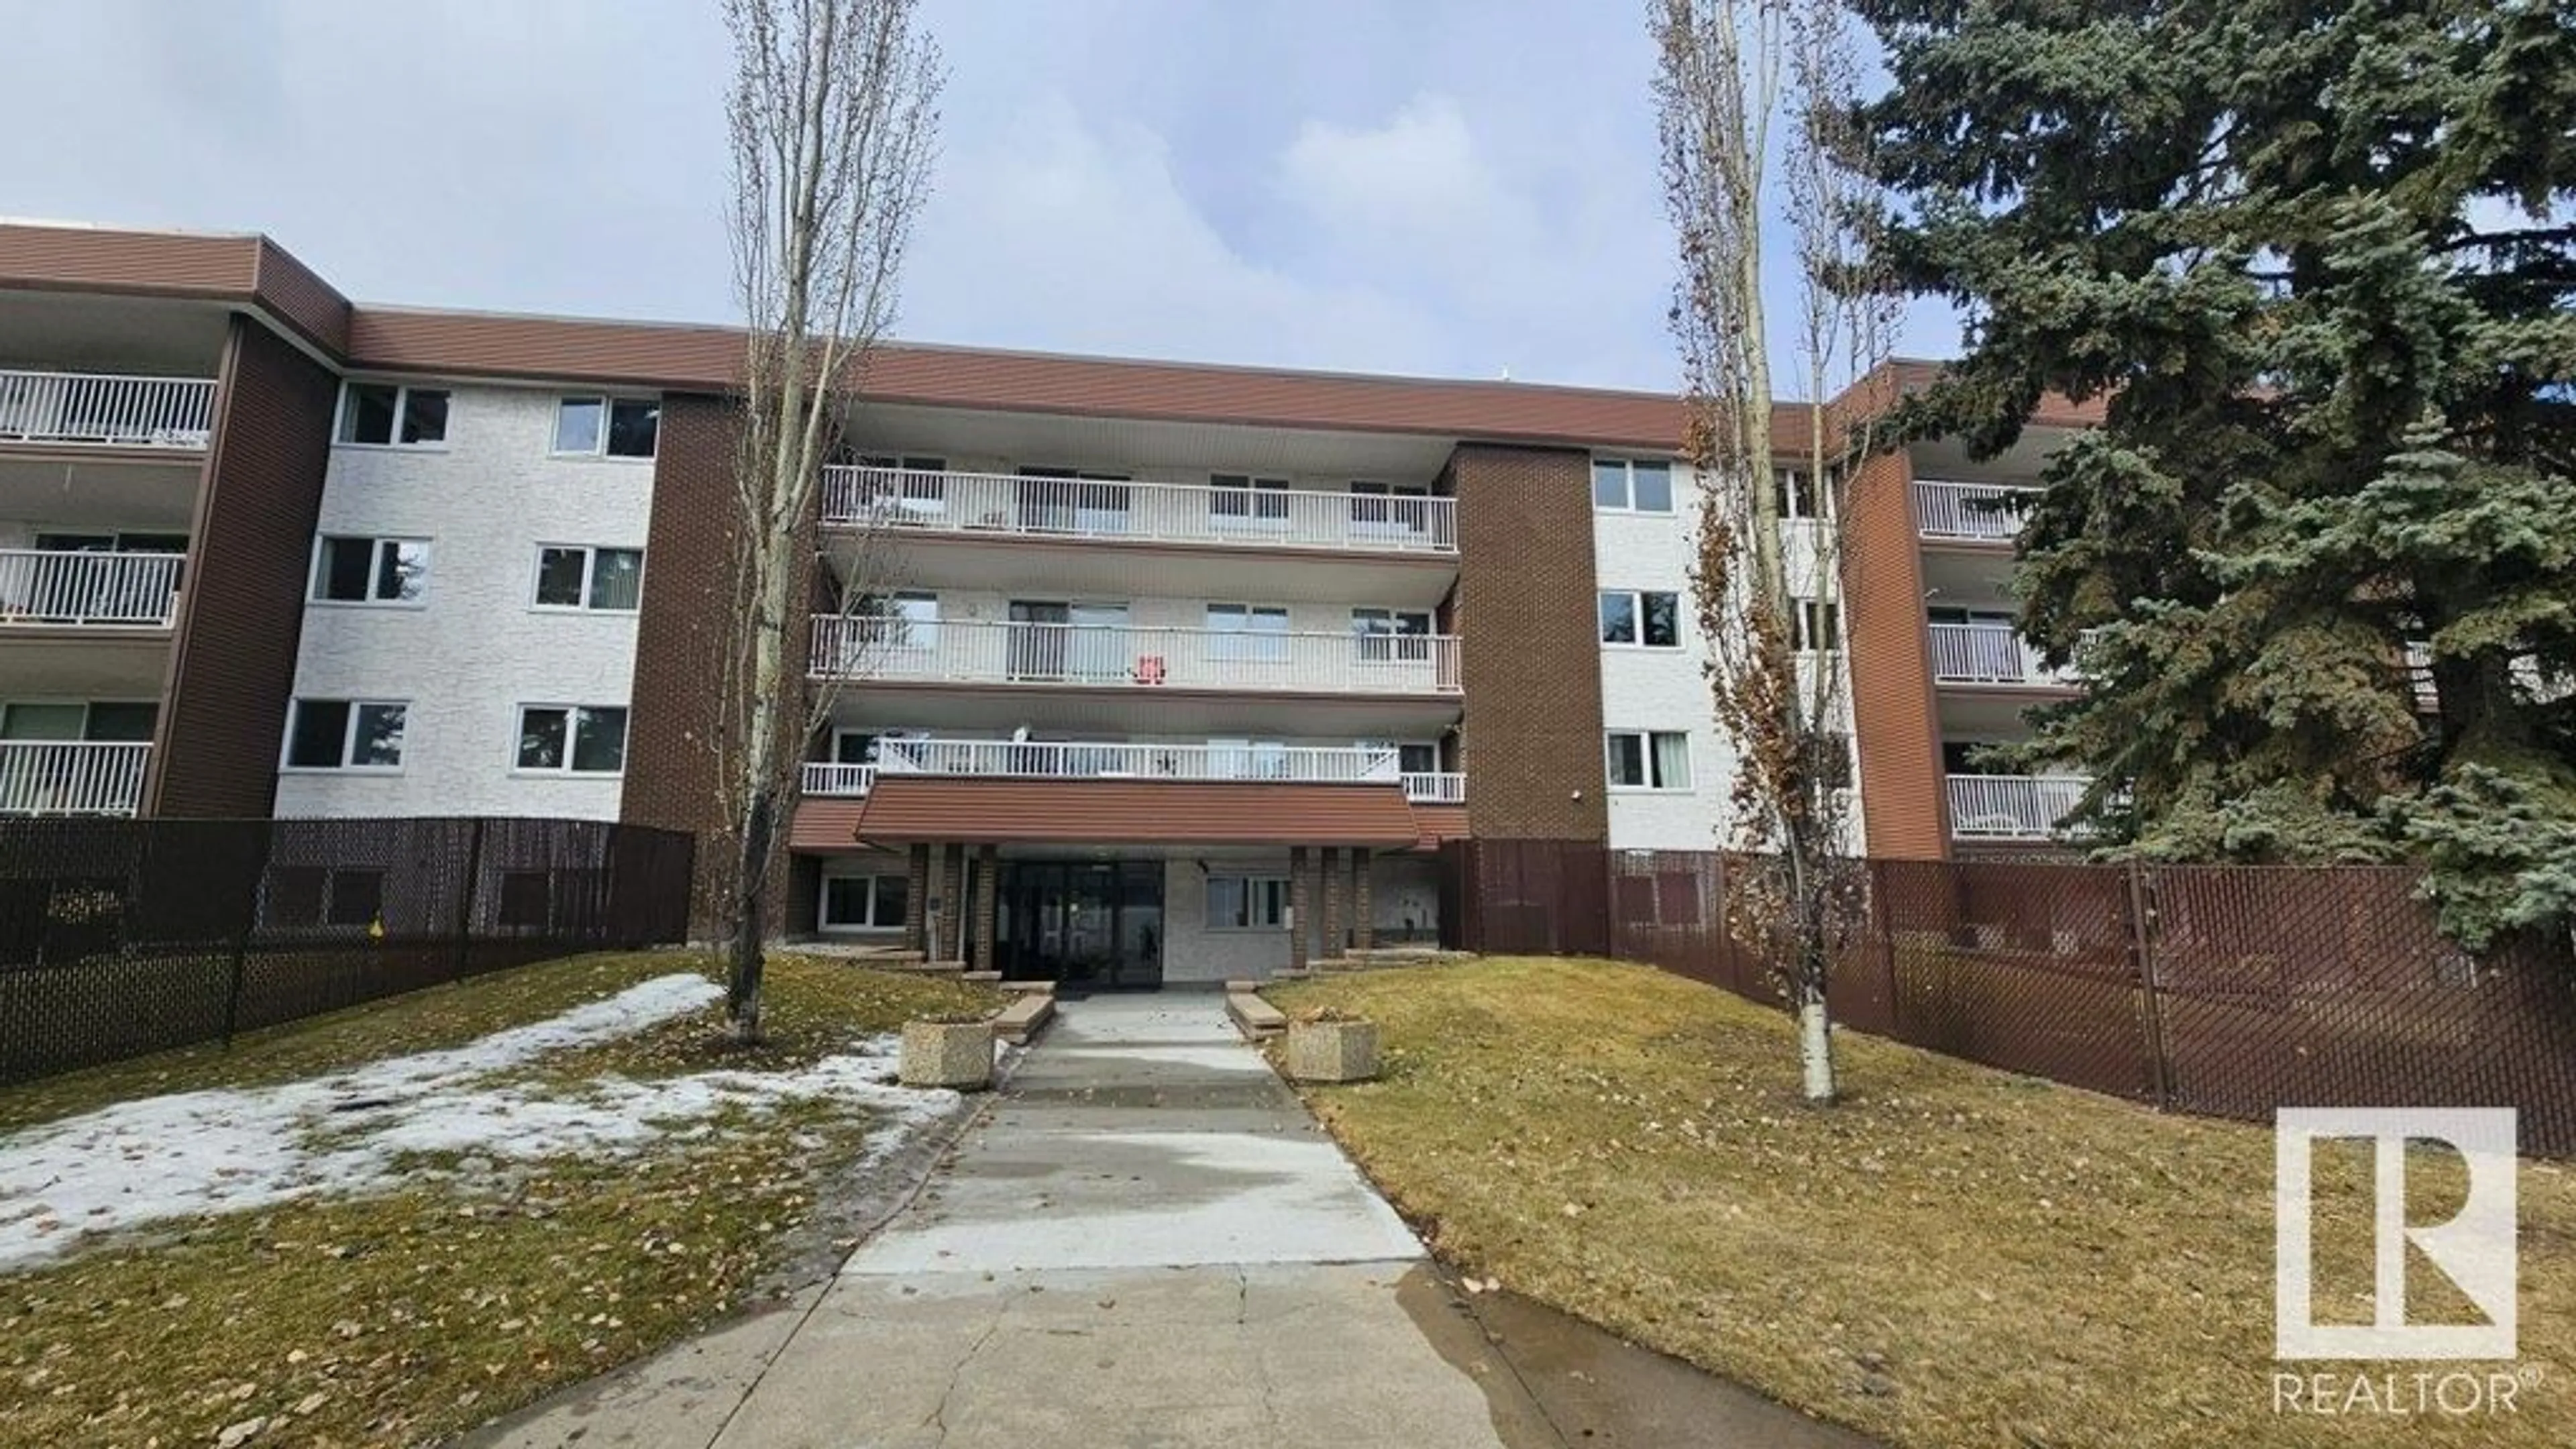 A pic from exterior of the house or condo for #411 14810 51 AV NW, Edmonton Alberta T6H5G5